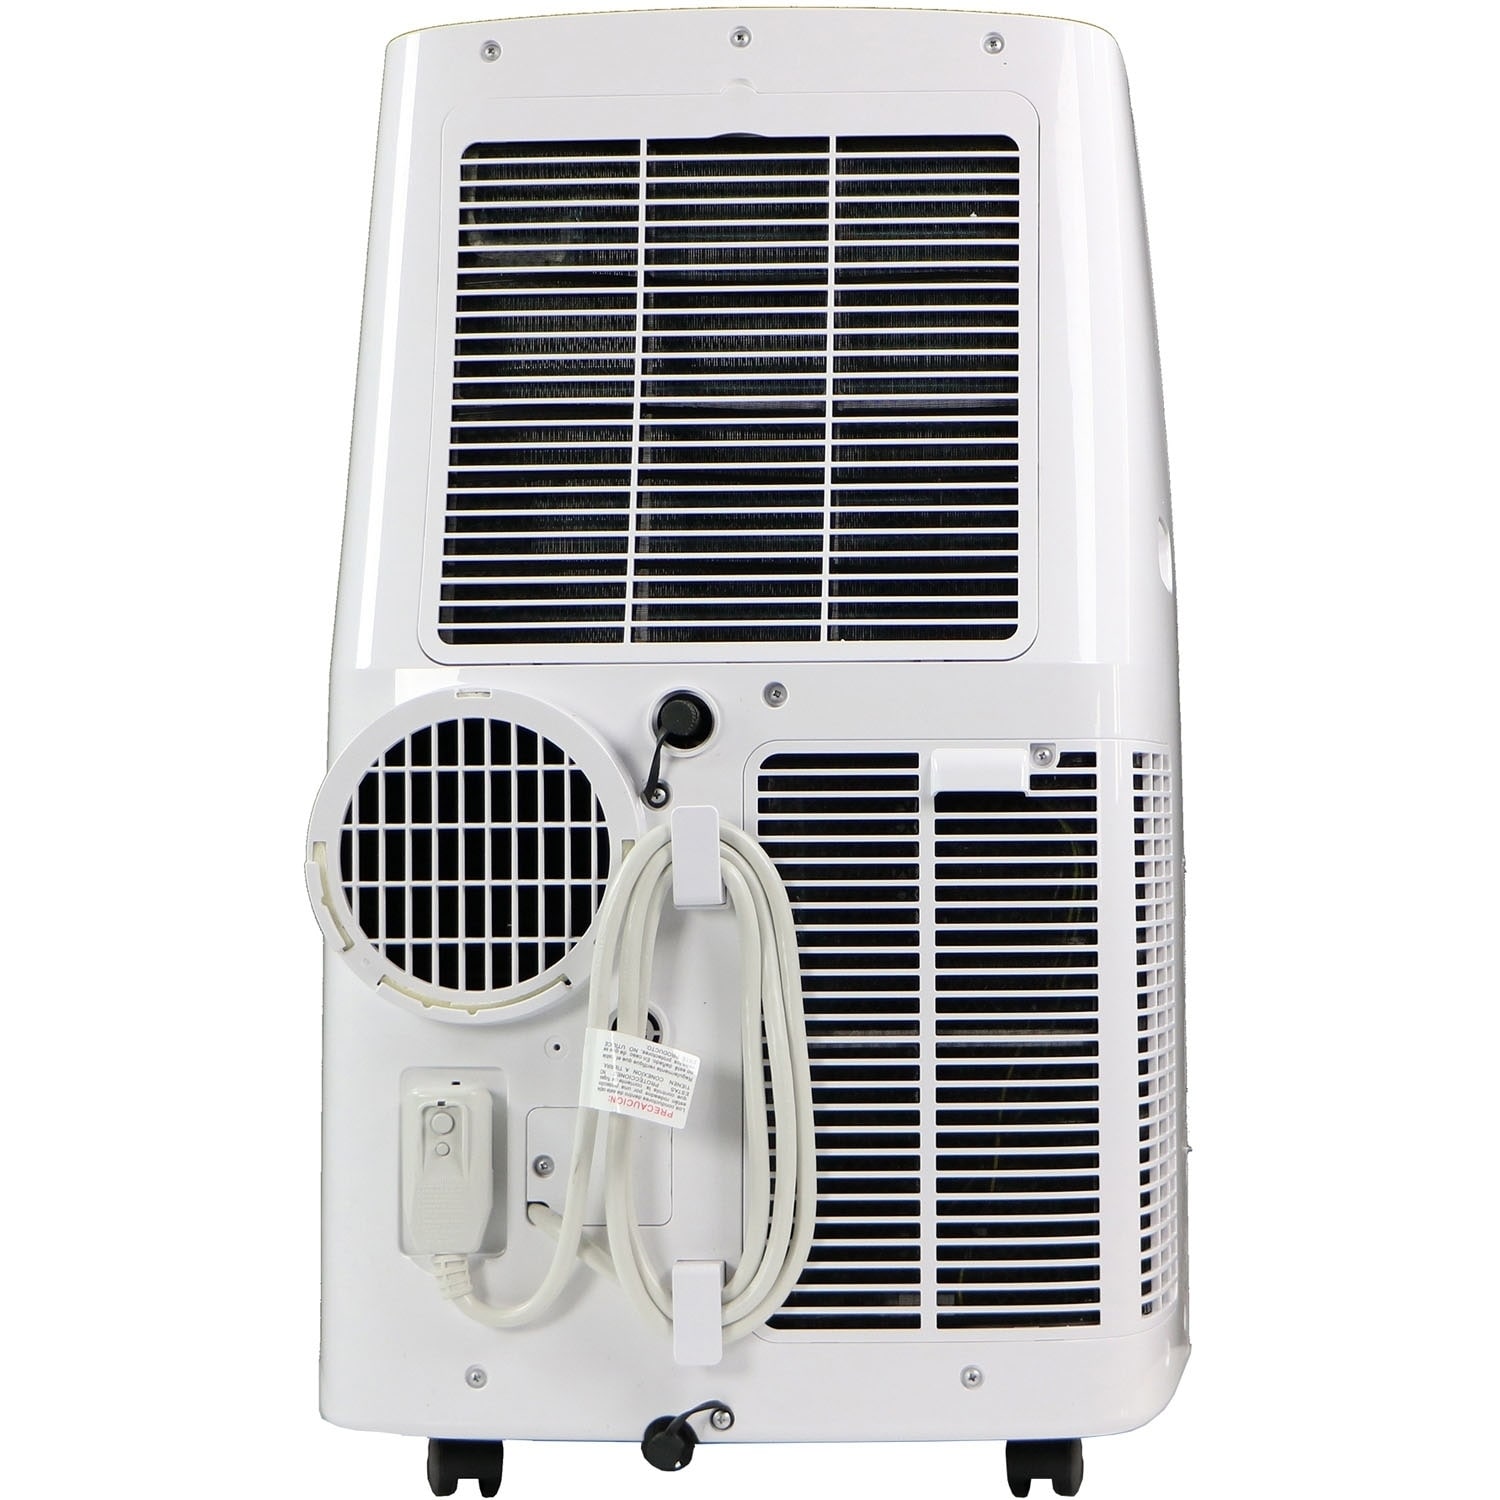 https://ak1.ostkcdn.com/images/products/23050698/Aux-115V-Portable-Air-Conditioner-with-Follow-Me-Remote-Control-for-Rooms-up-to-200-Sq.-Ft.-4f9a1680-8a9b-4f64-8d8b-fa9479f3bf30.jpg